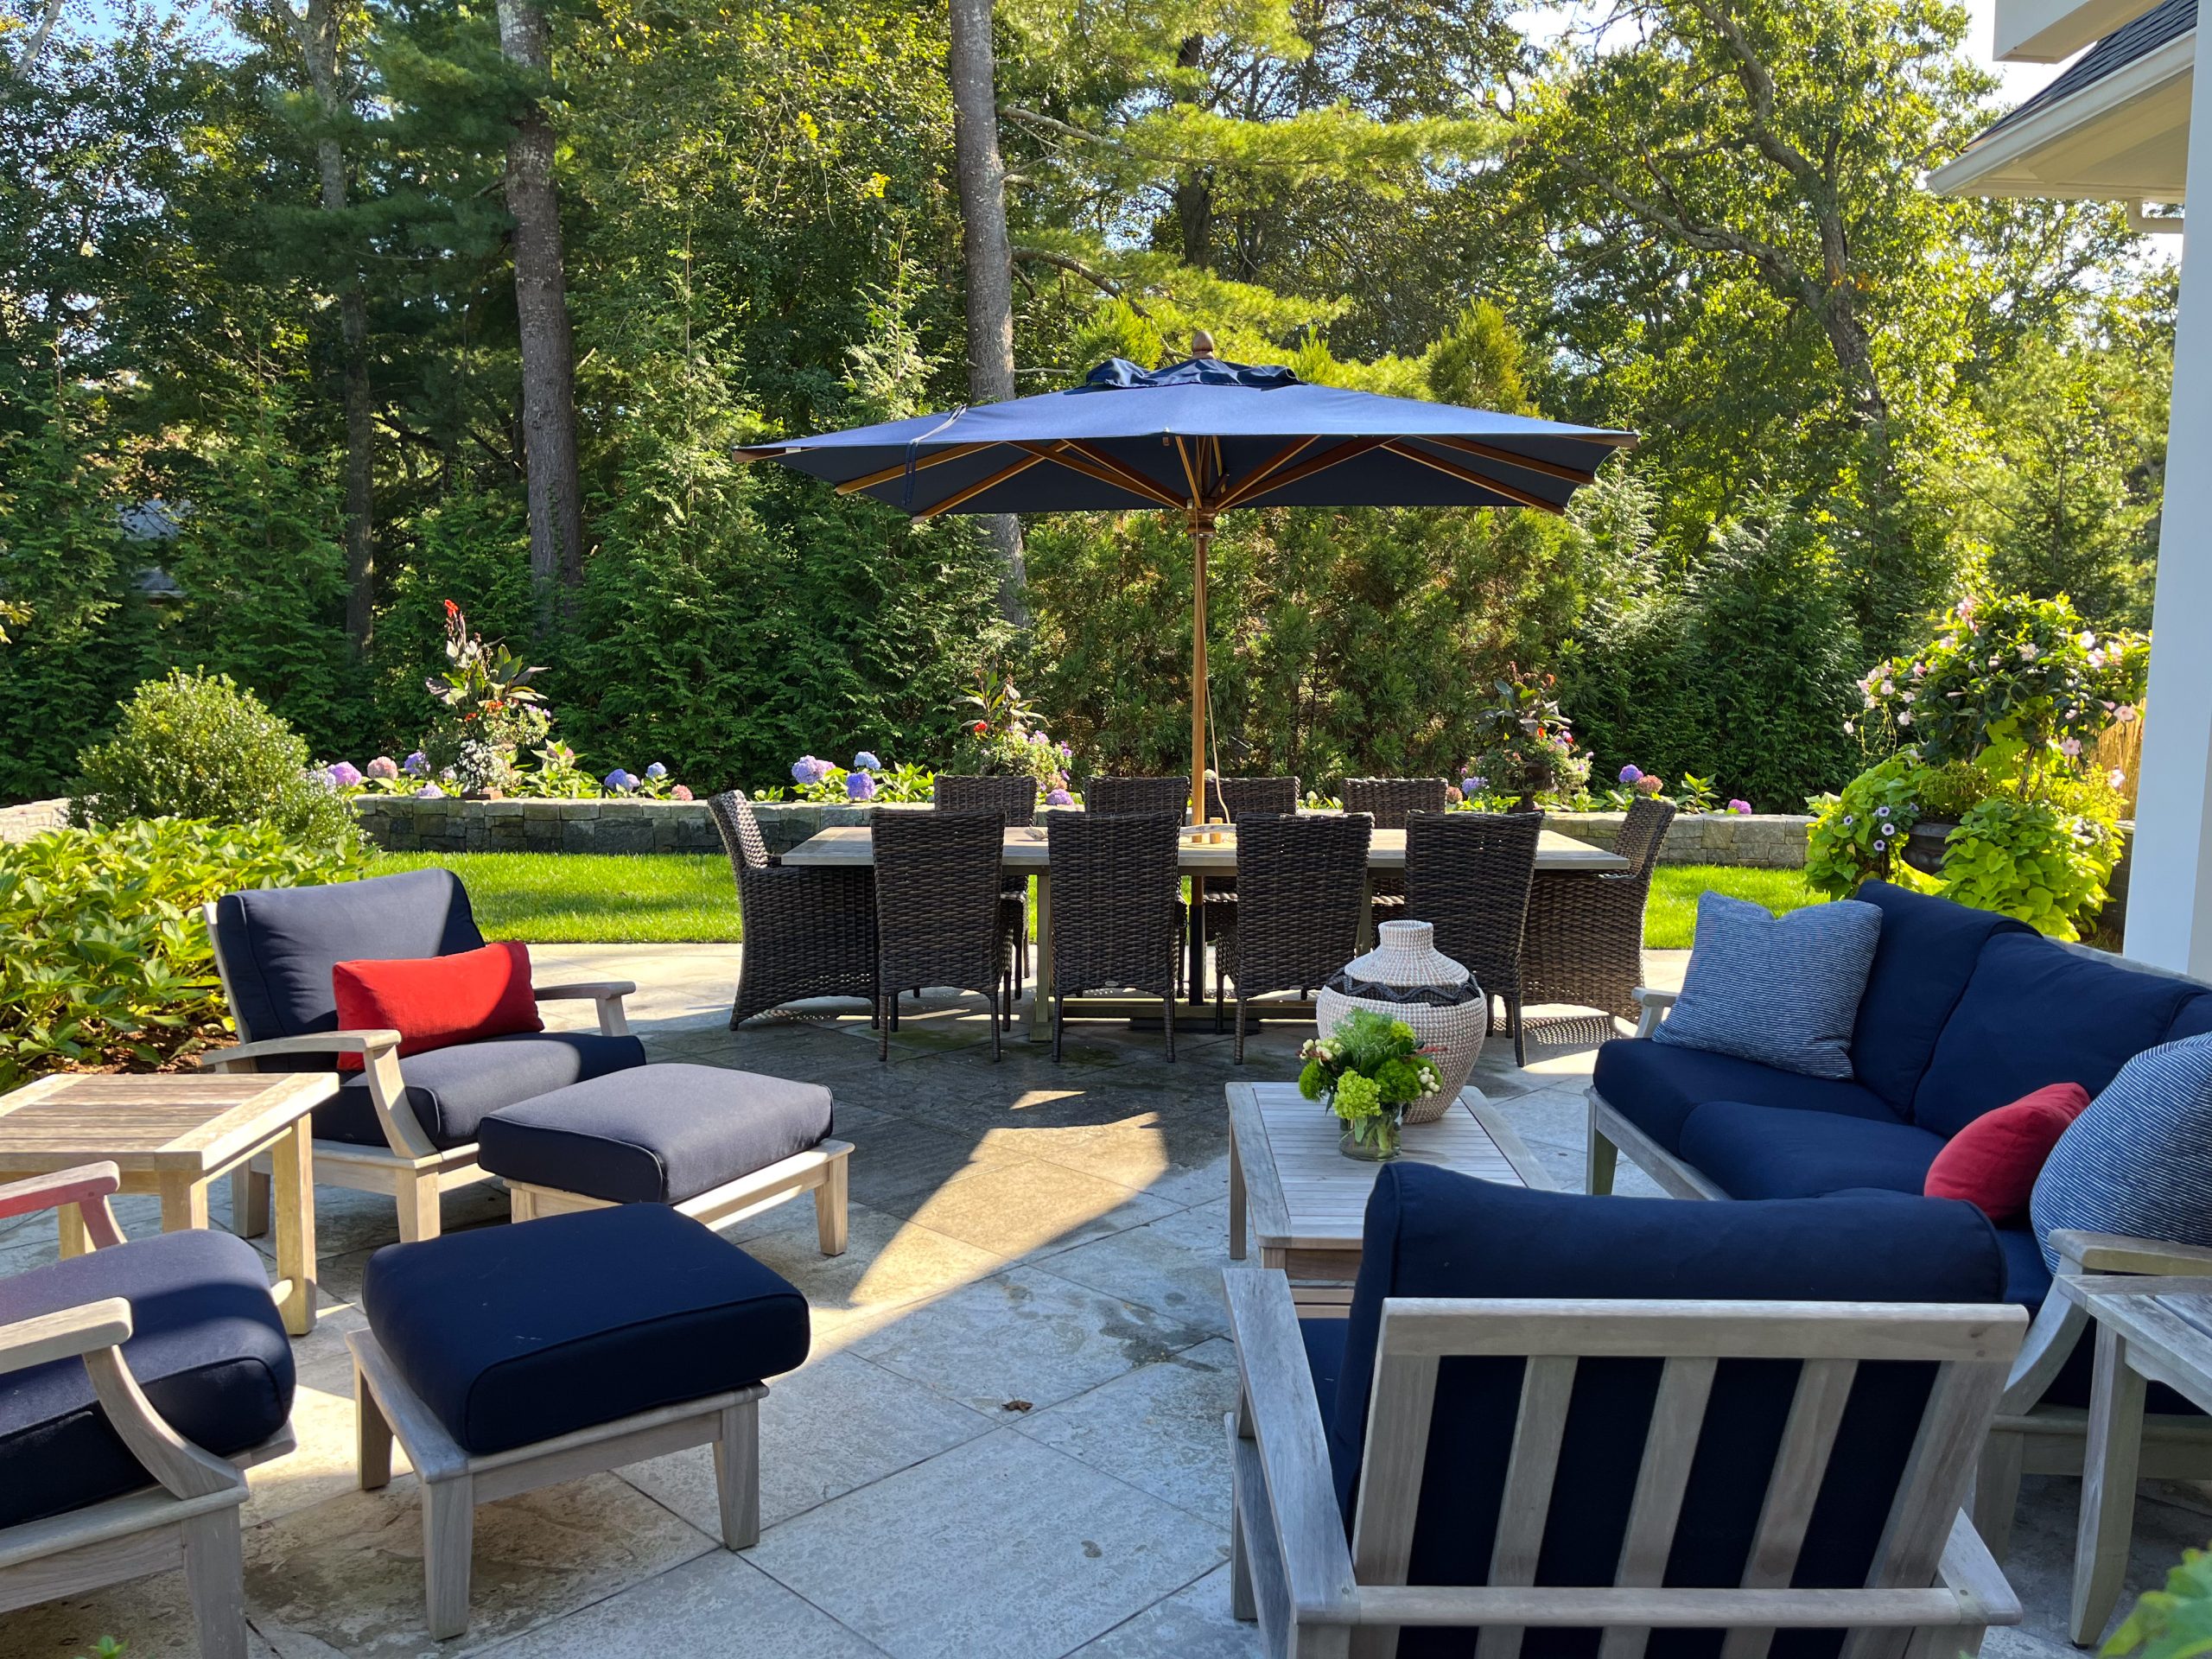 A beautiful yard with green trees and a patio set with navy blue cushions and red accent pillows.